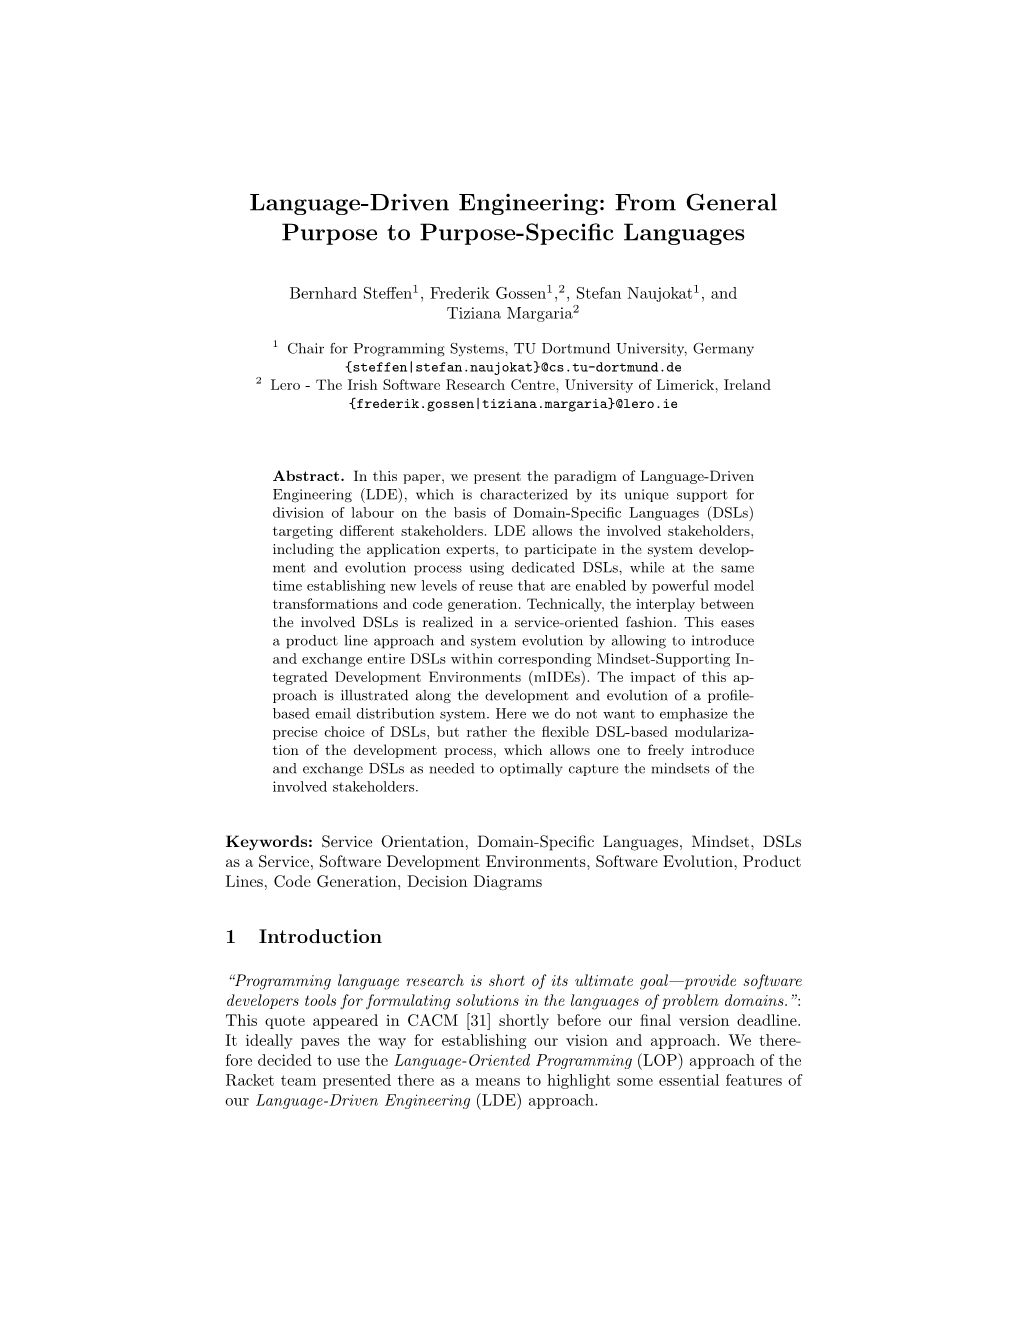 Language-Driven Engineering: from General Purpose to Purpose-Speciﬁc Languages